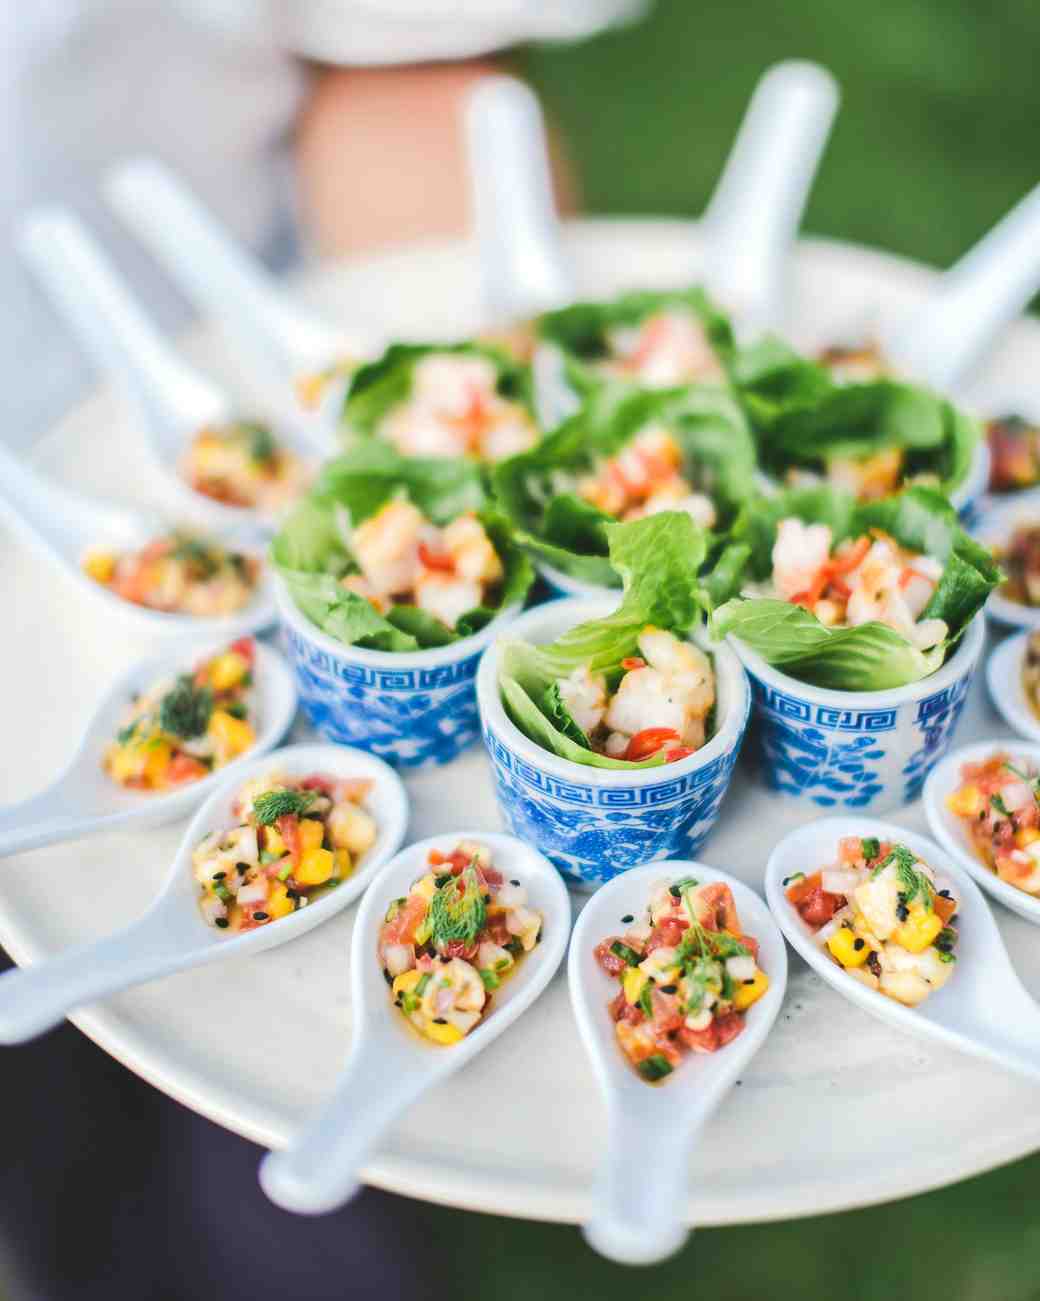 25 unexpected wedding food ideas your guests will love | martha